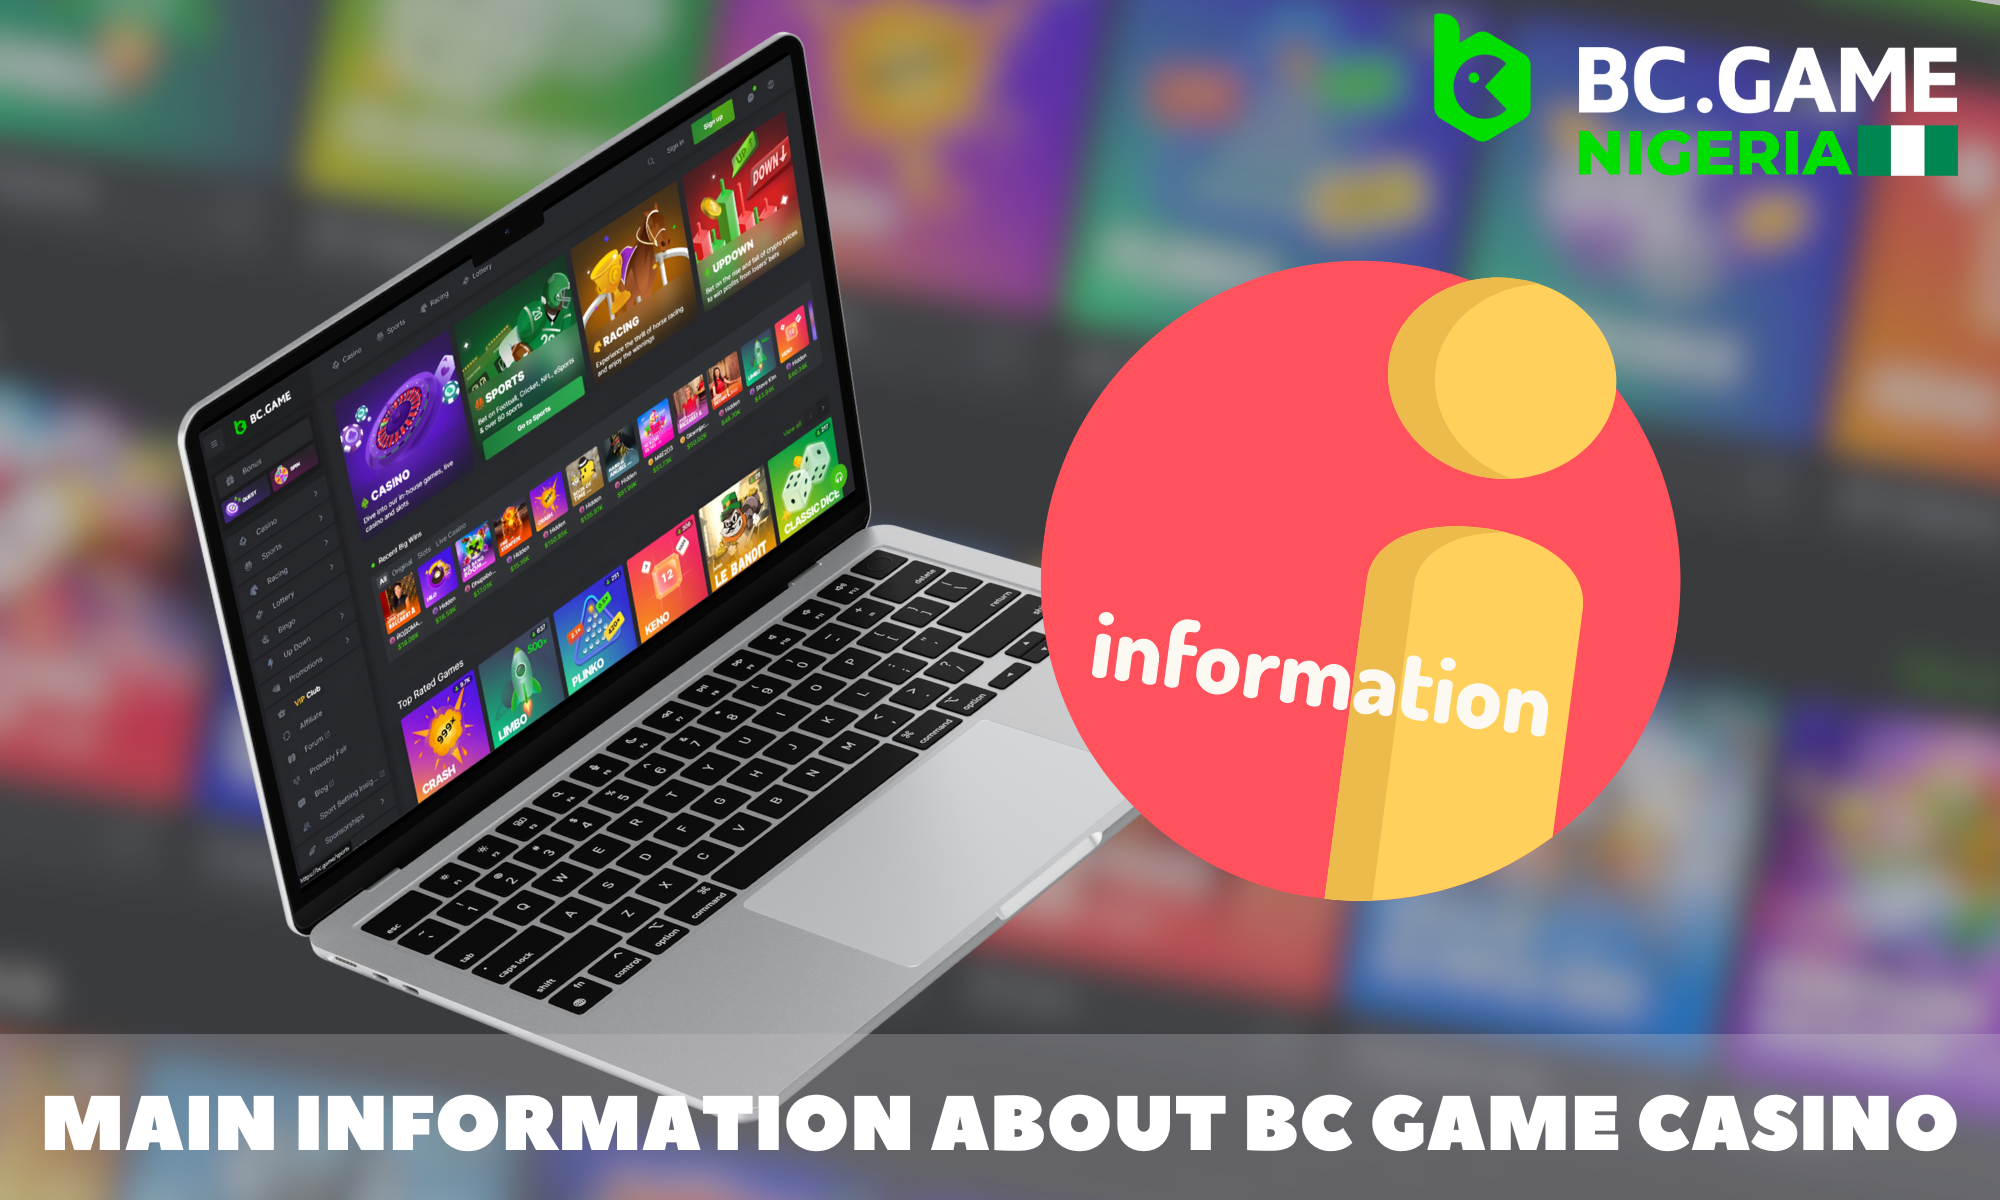 More information about BC Game online casino